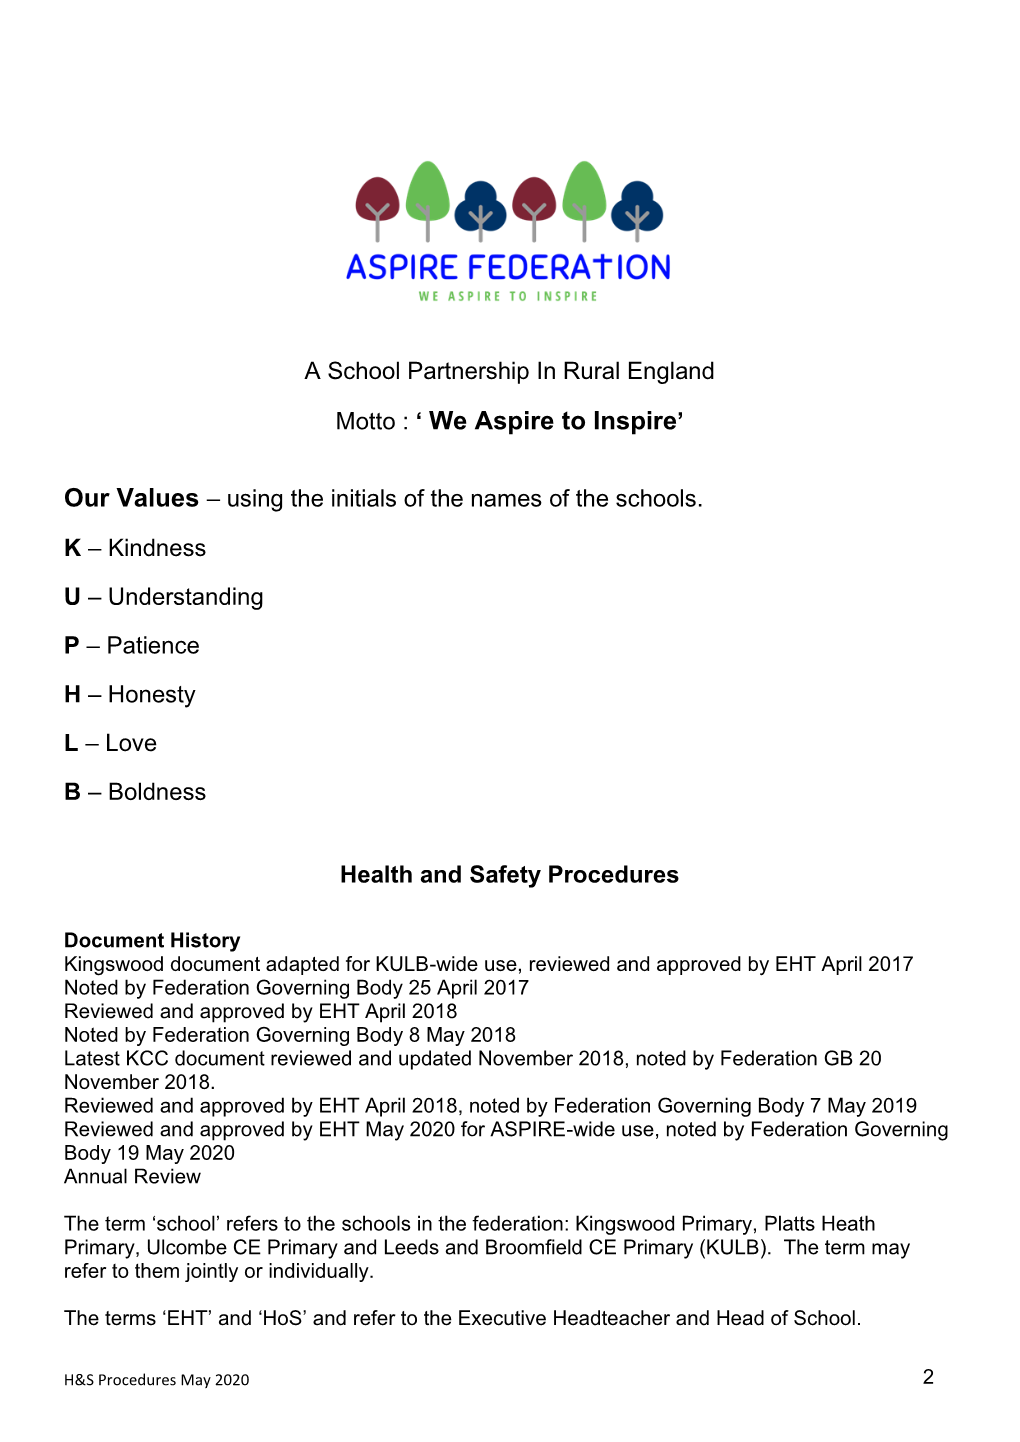 Health and Safety Procedures [PDF]